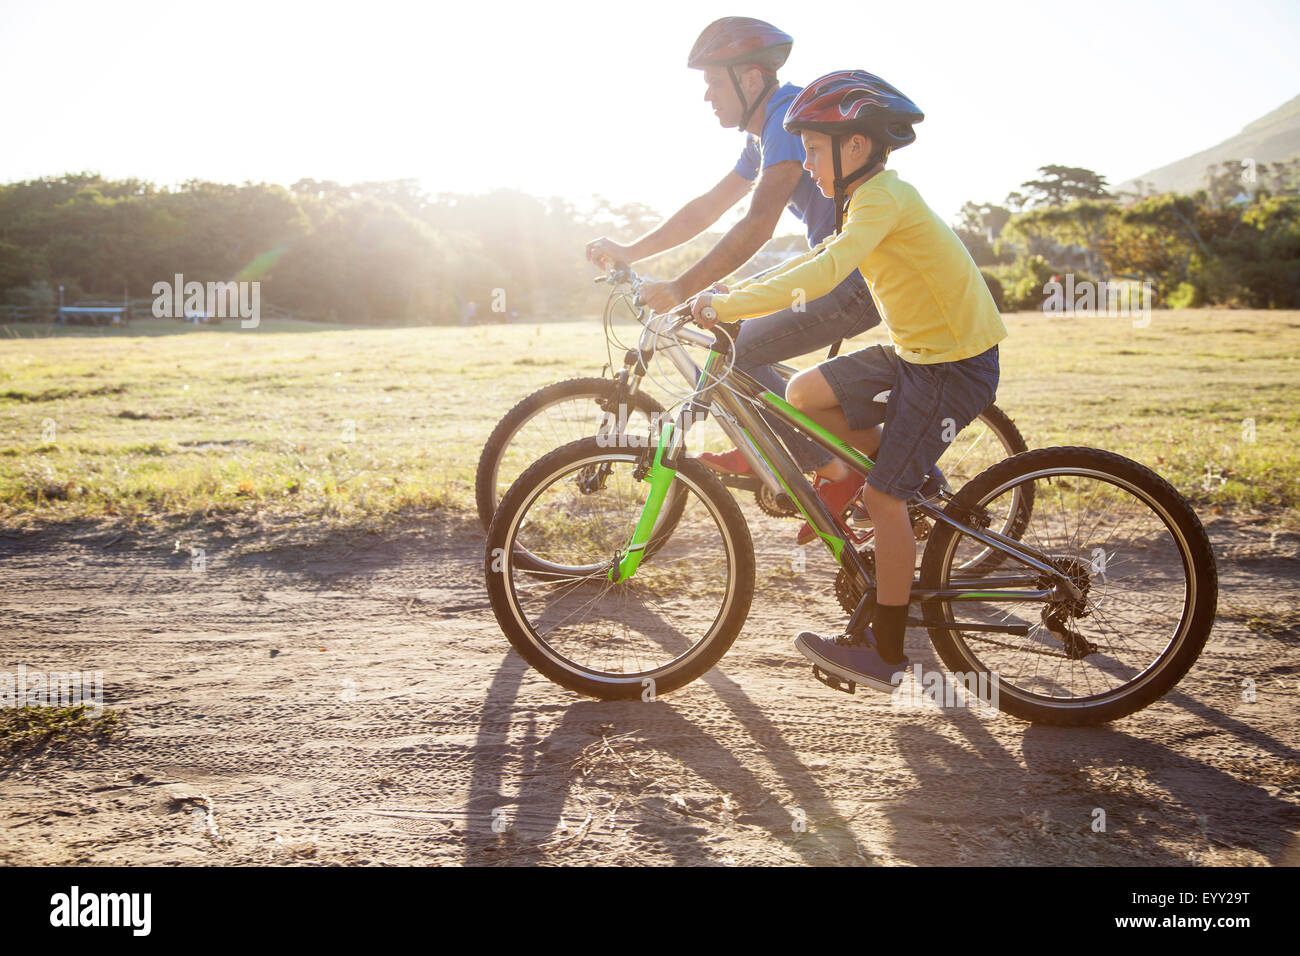 Caucasian father and son riding bicycles on dirt path Stock Photo